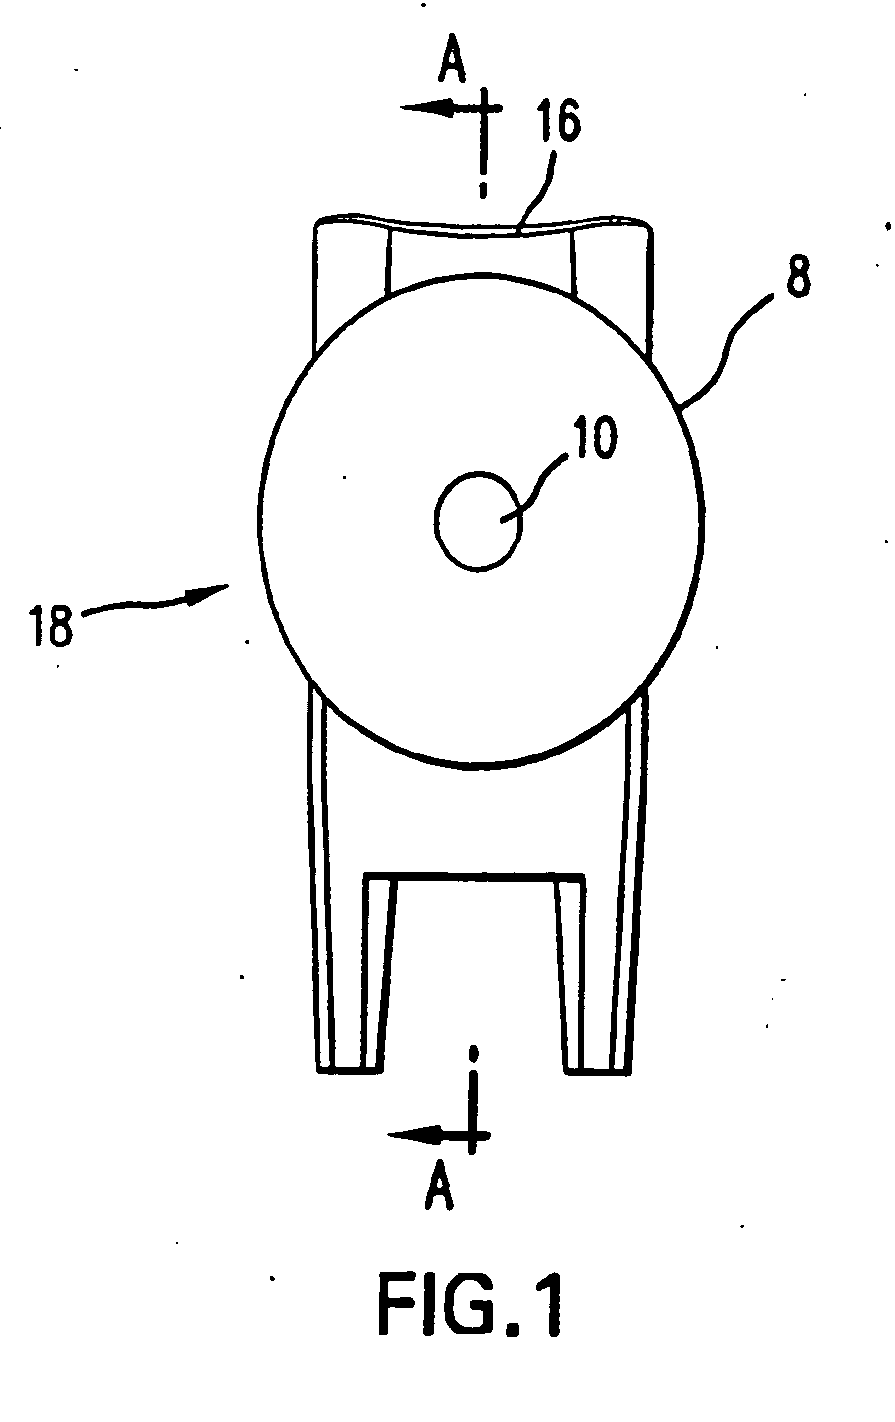 Pressure chamber nozzle assembly